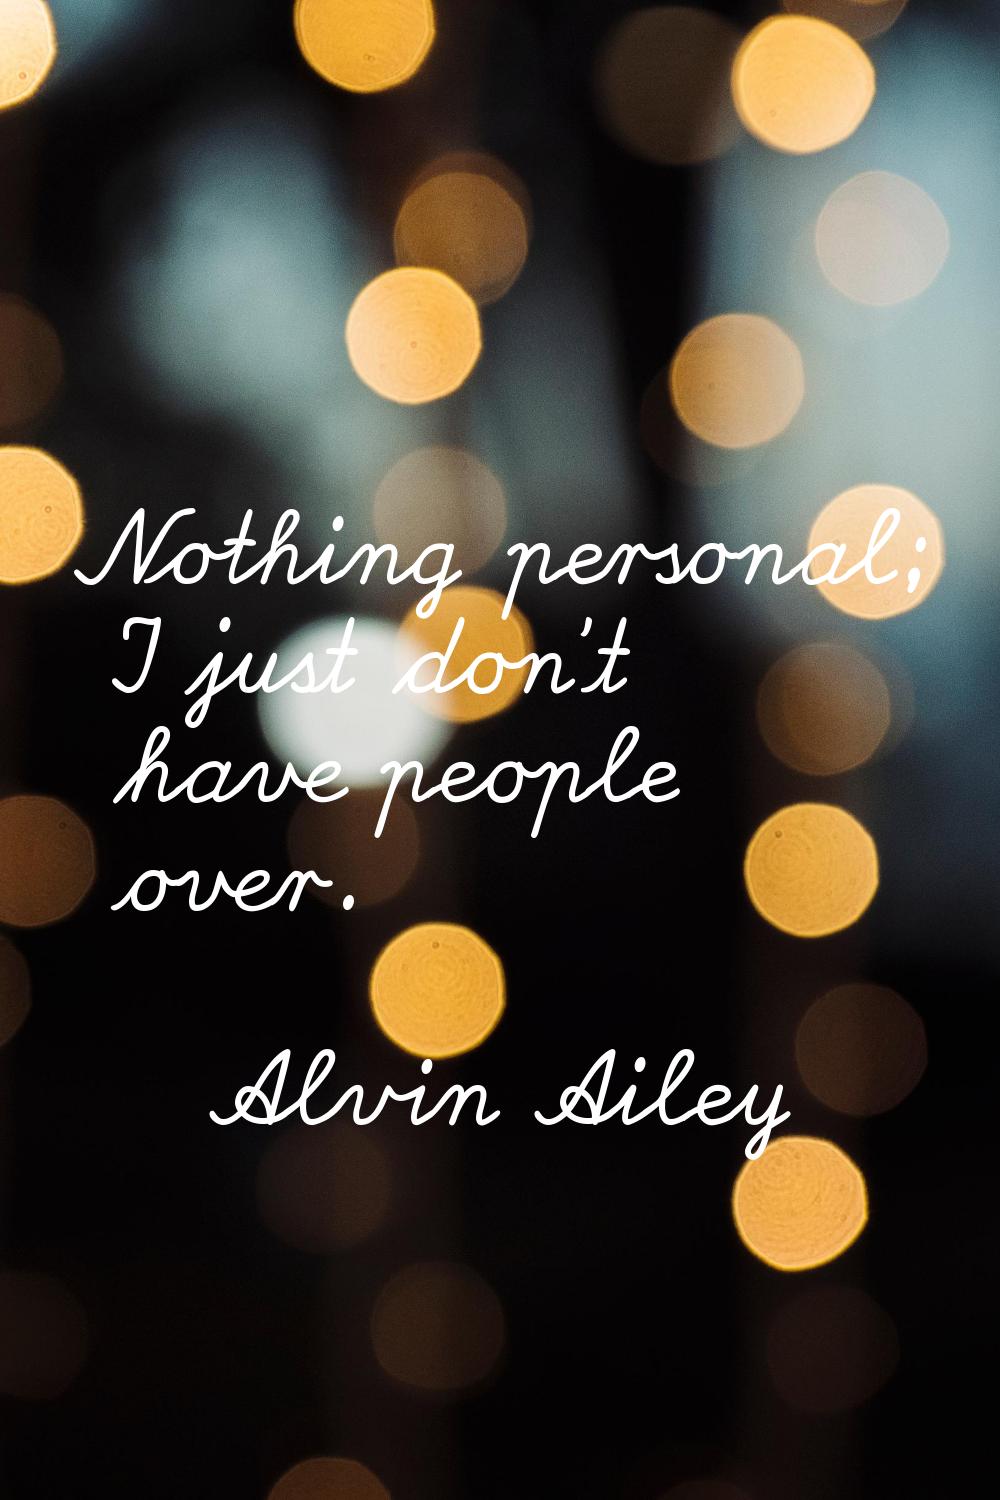 Nothing personal; I just don't have people over.